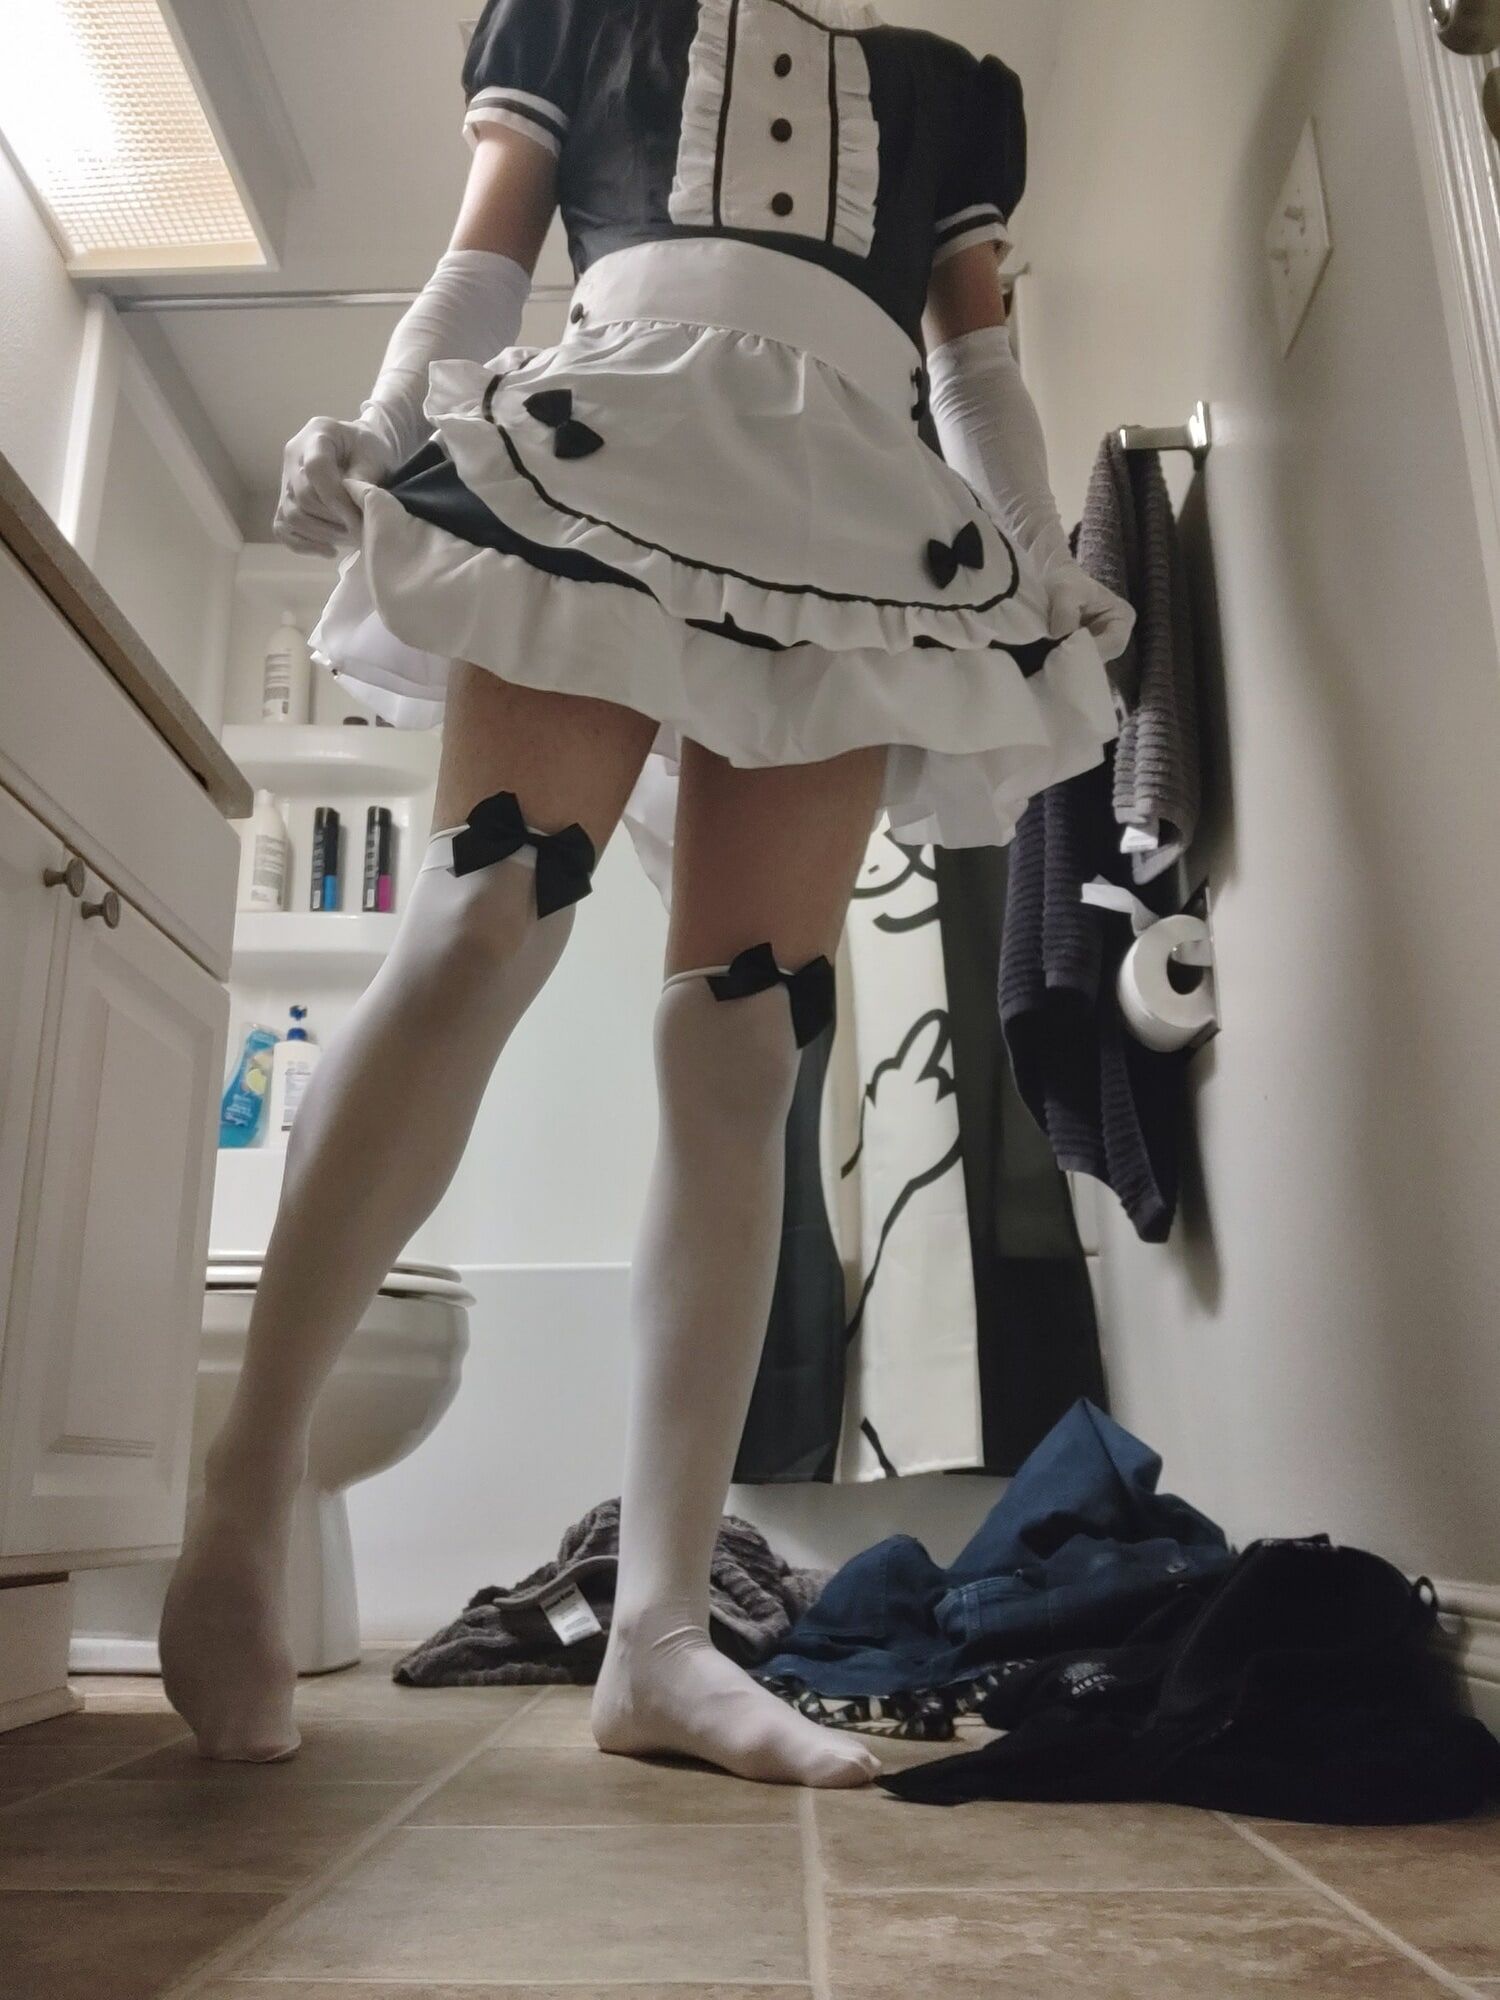 New maid outfit